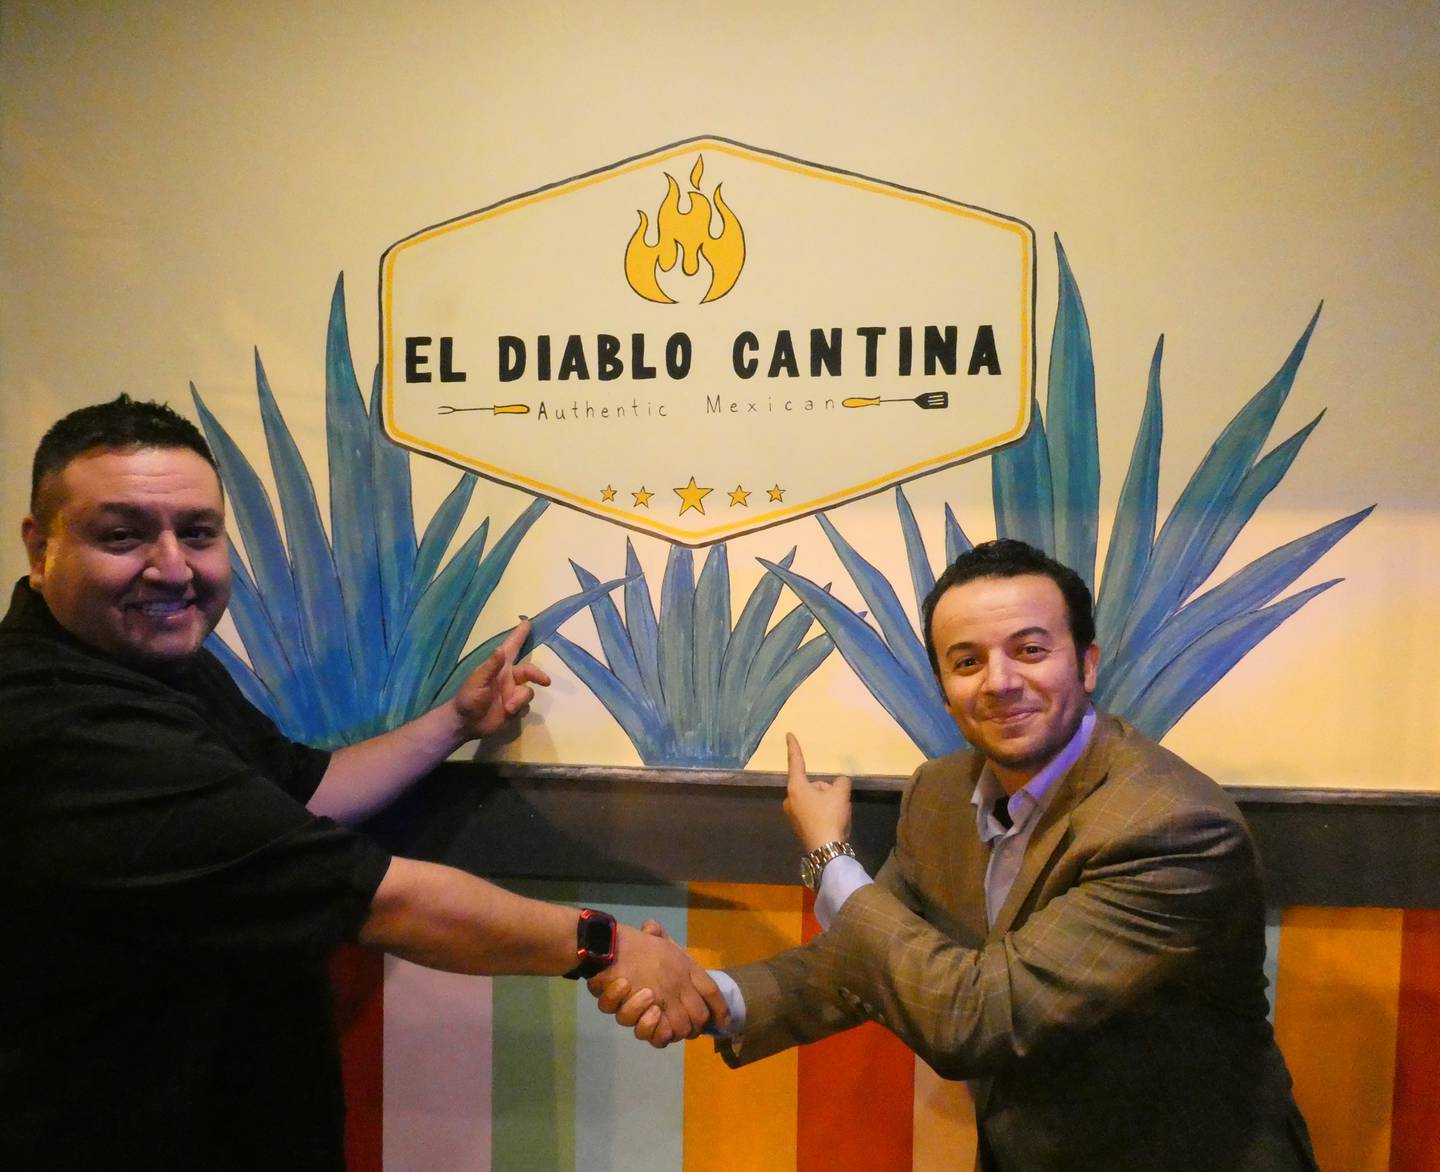 Chef Roberto Barojas Alvarez, left, and owner Marwan Taib, right, pose in front of their new restaurant, El Diablo Cantina, on Saturday, March 5, 2022.